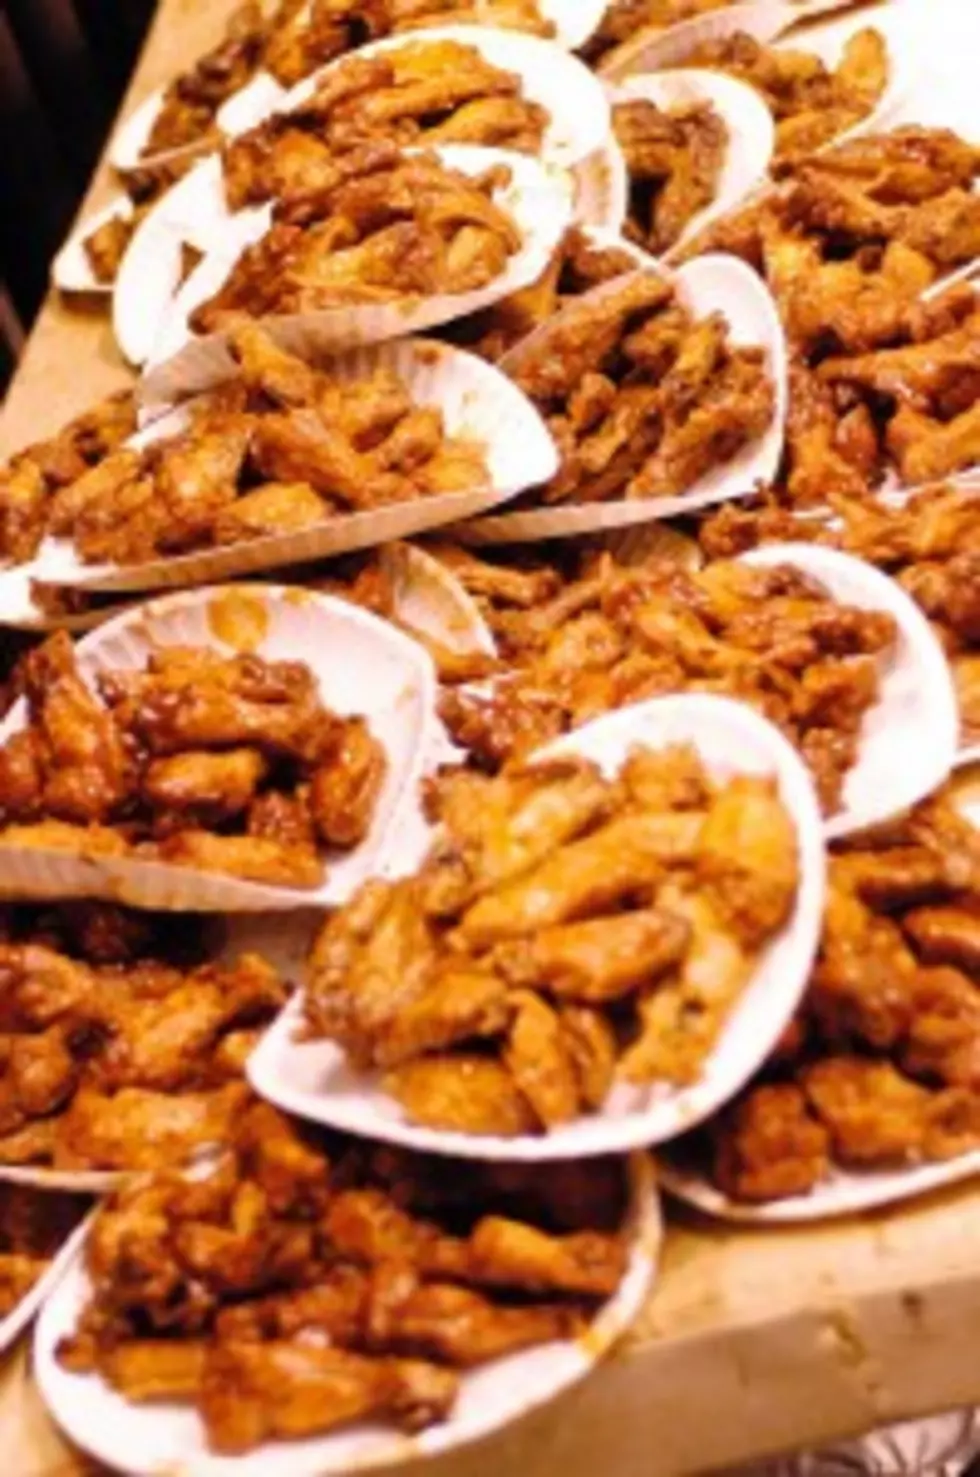 VOTE: Is it a Super Bowl Party without the wings?